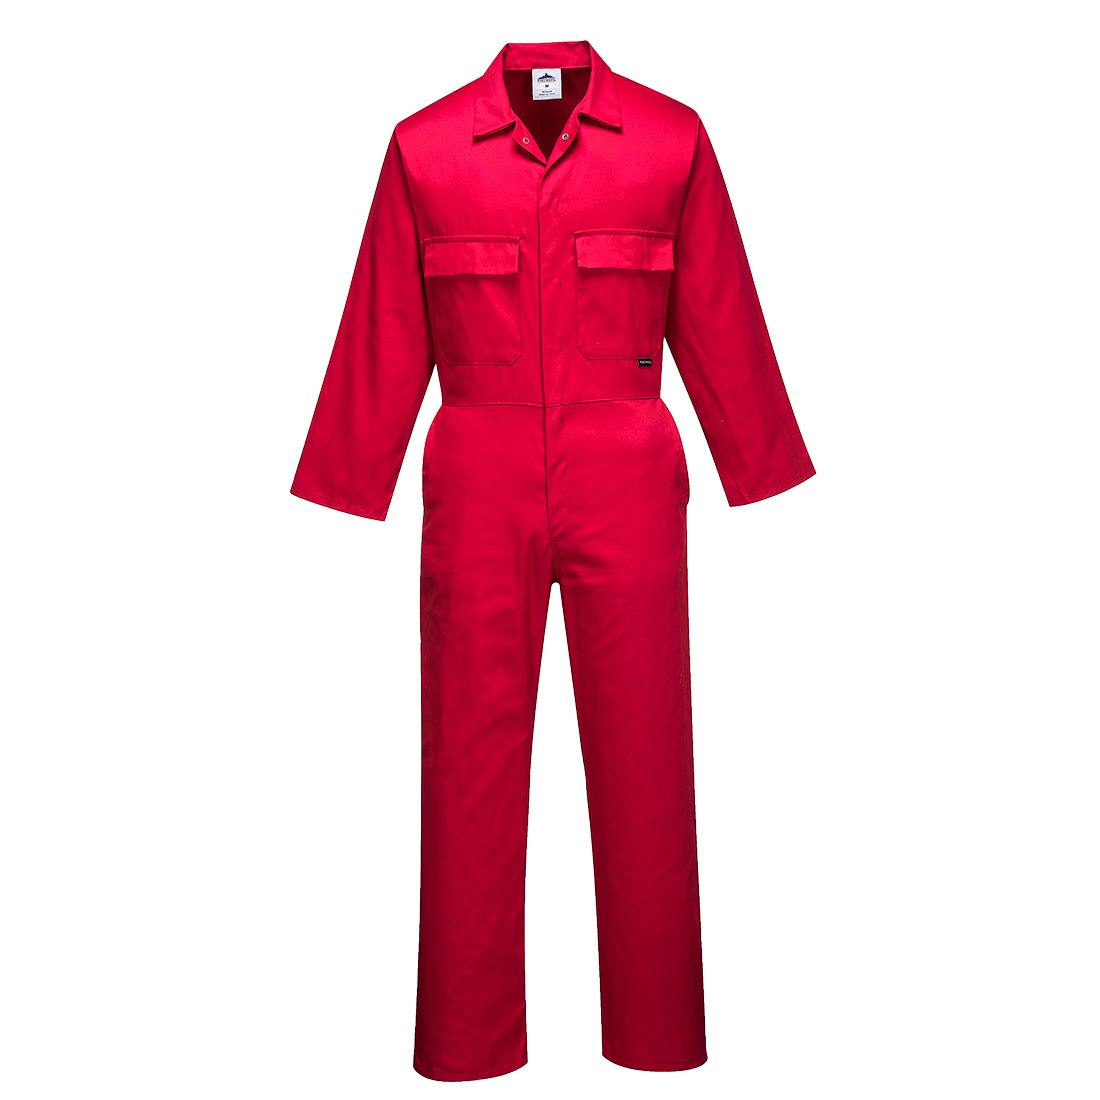 S999RER4XL Euro Work Polycotton Coverall, Red - 4XL -  Portwest